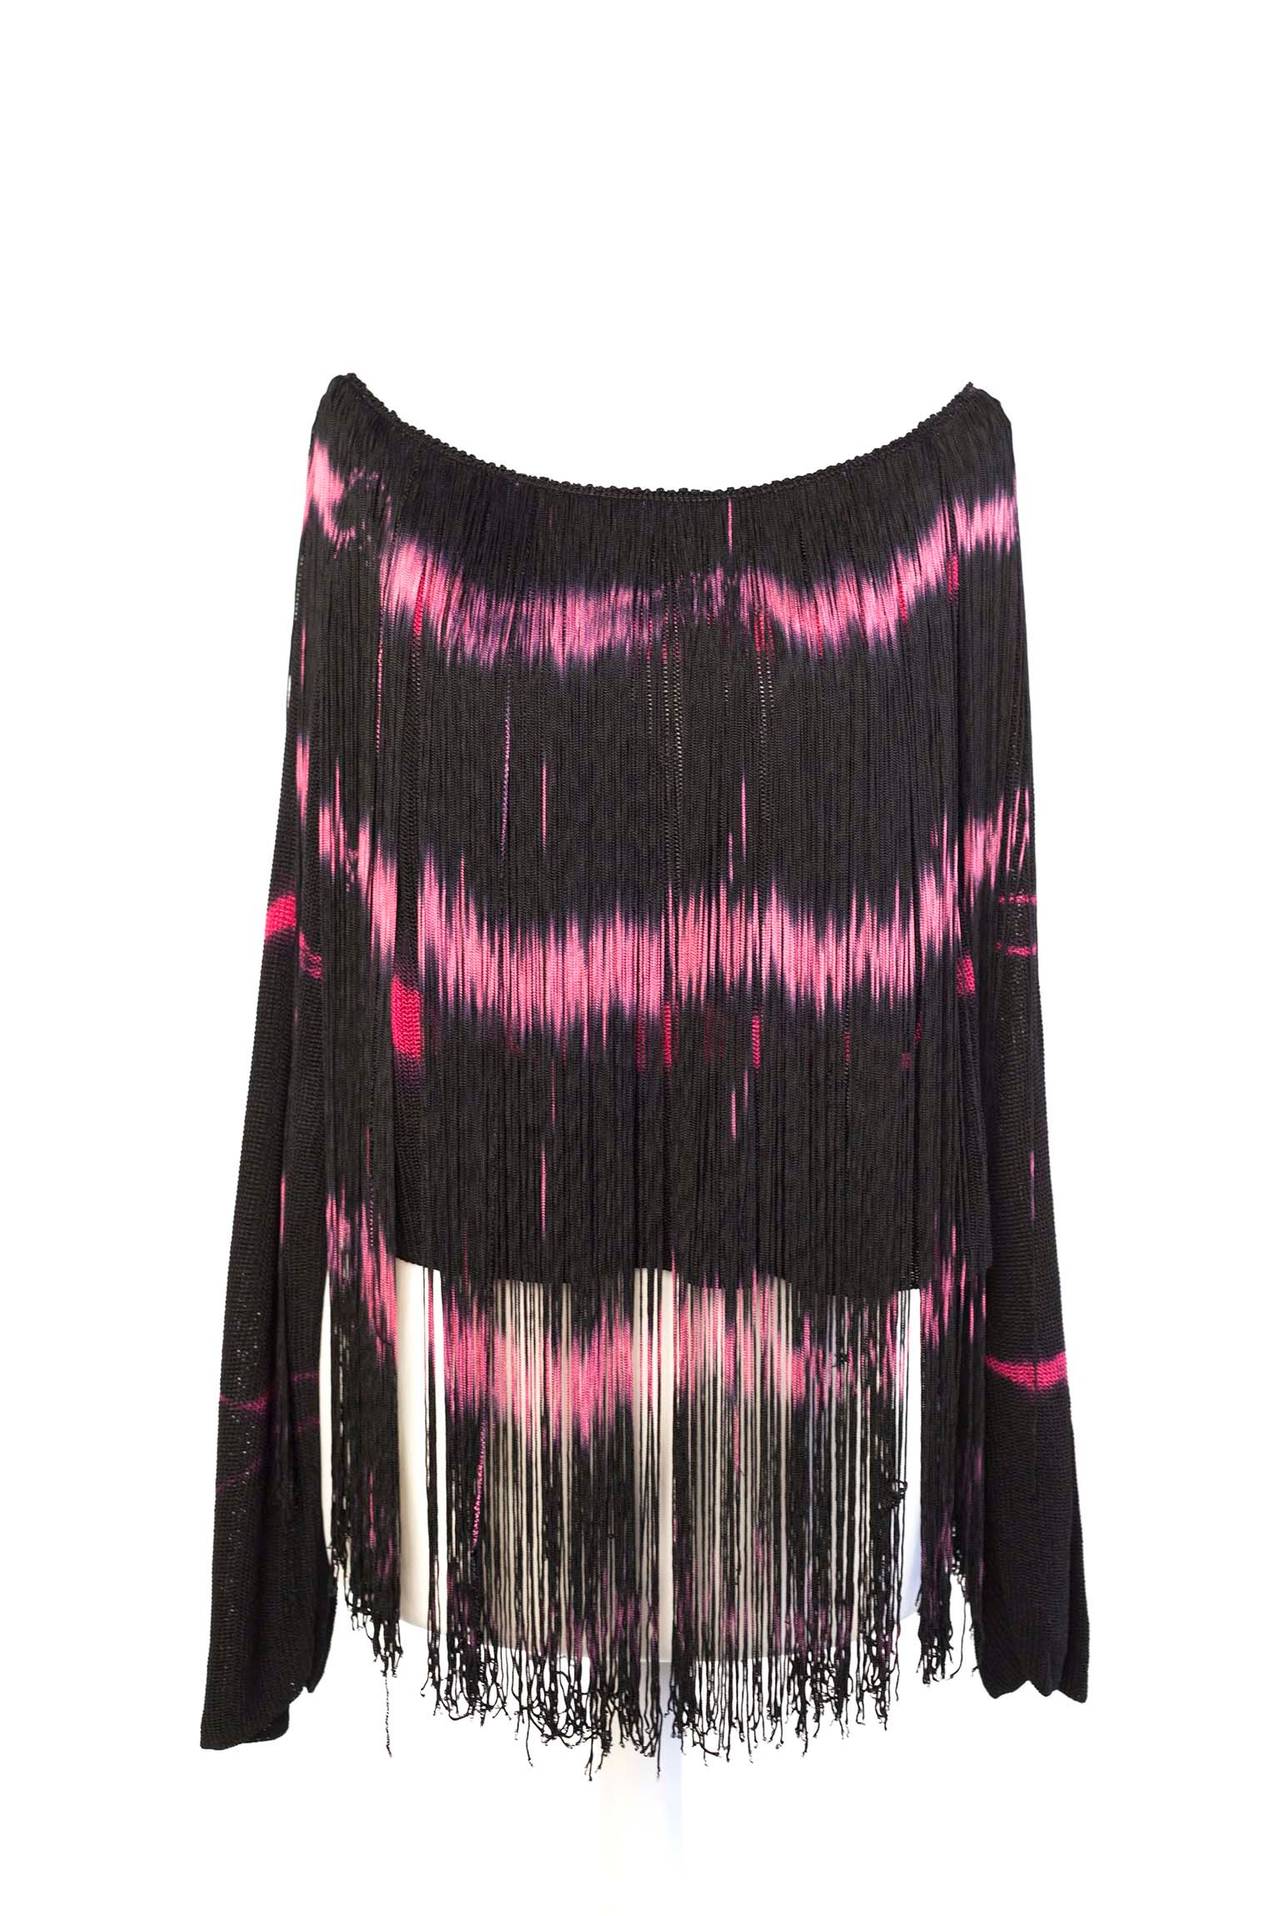 Jean Paul Gaultier vintage tye dye fringed top. Top has long fringe and is tye dyed in a fuschia color front and back, scooped neck and 3/4 sleeves.